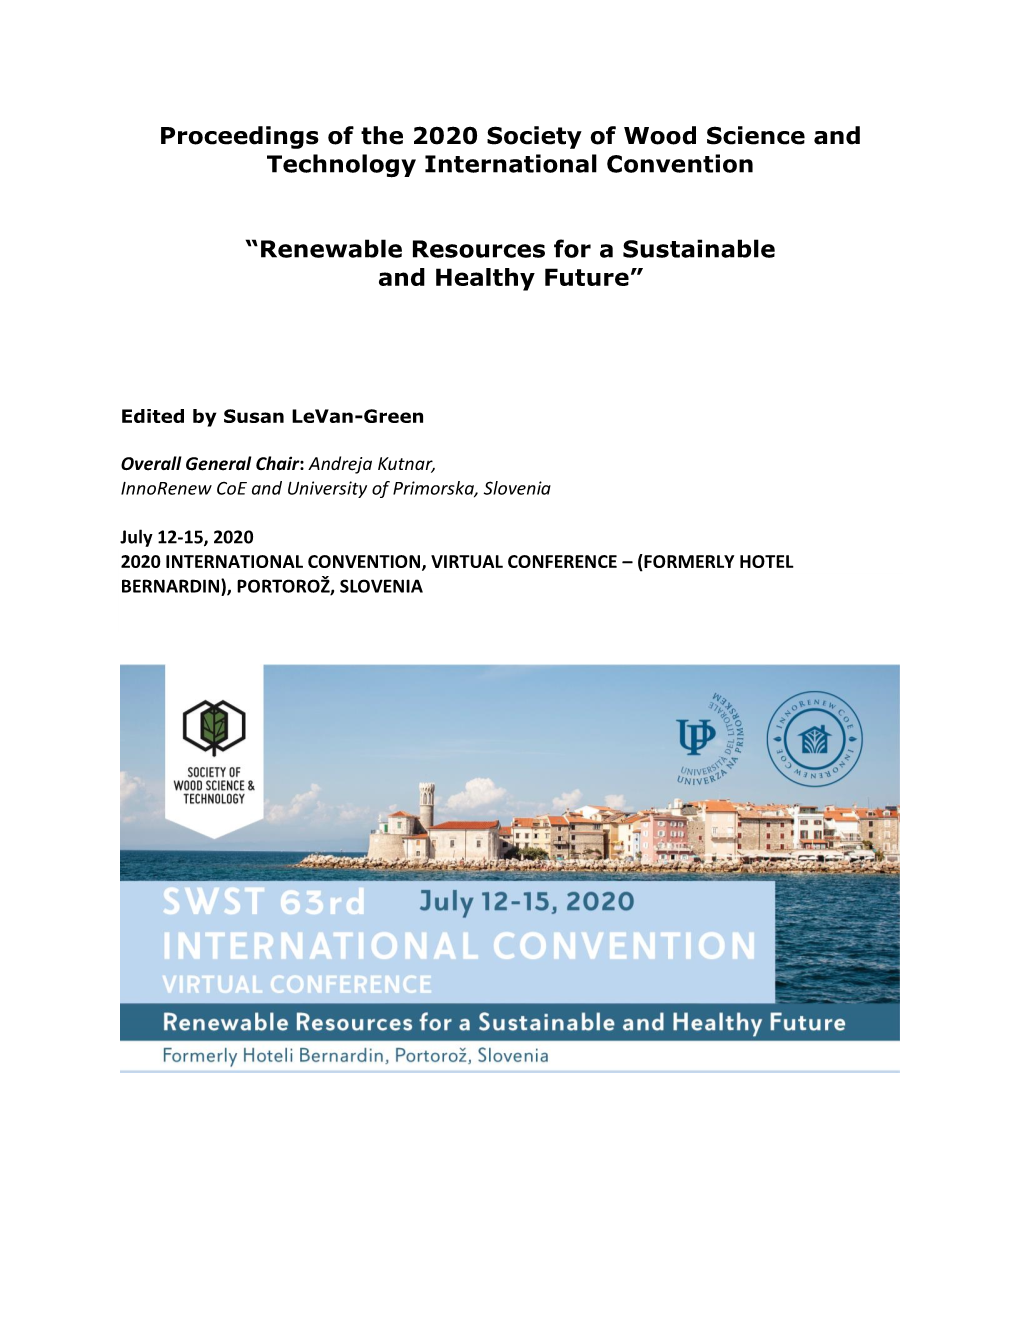 Proceedings of the 2020 Society of Wood Science and Technology International Convention